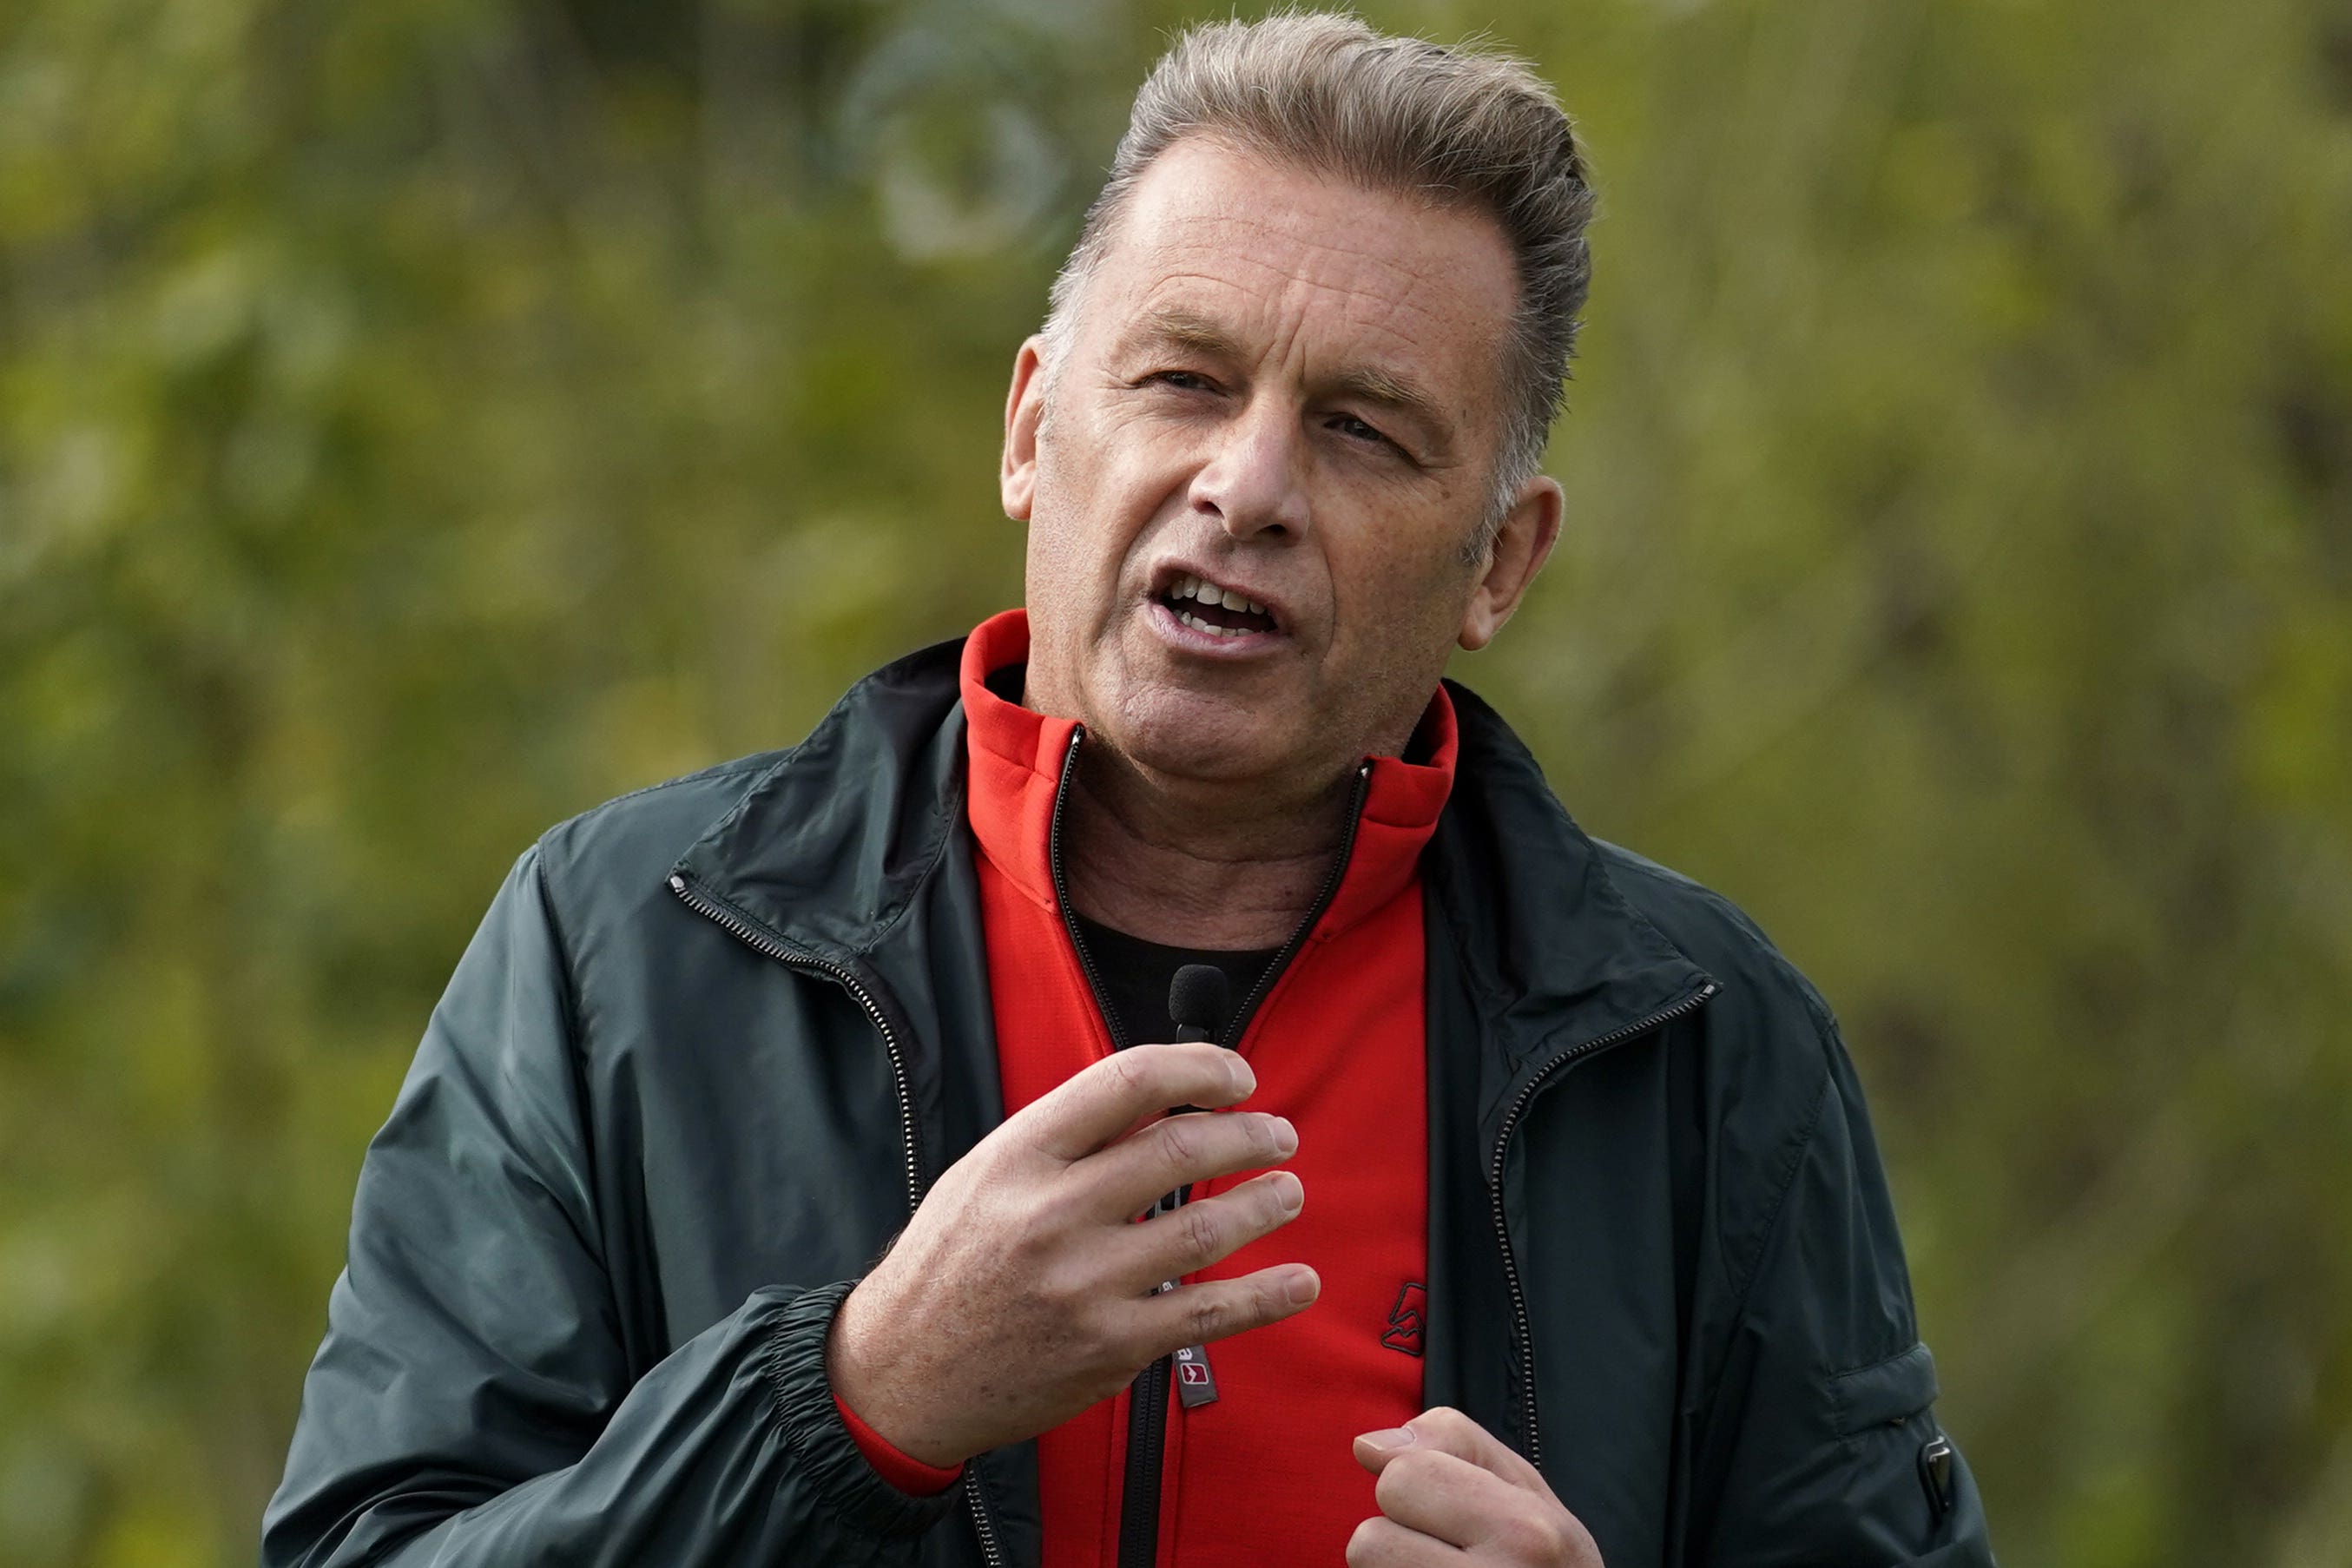 Trial for Chris Packham's libel claim set to begin | The Independent